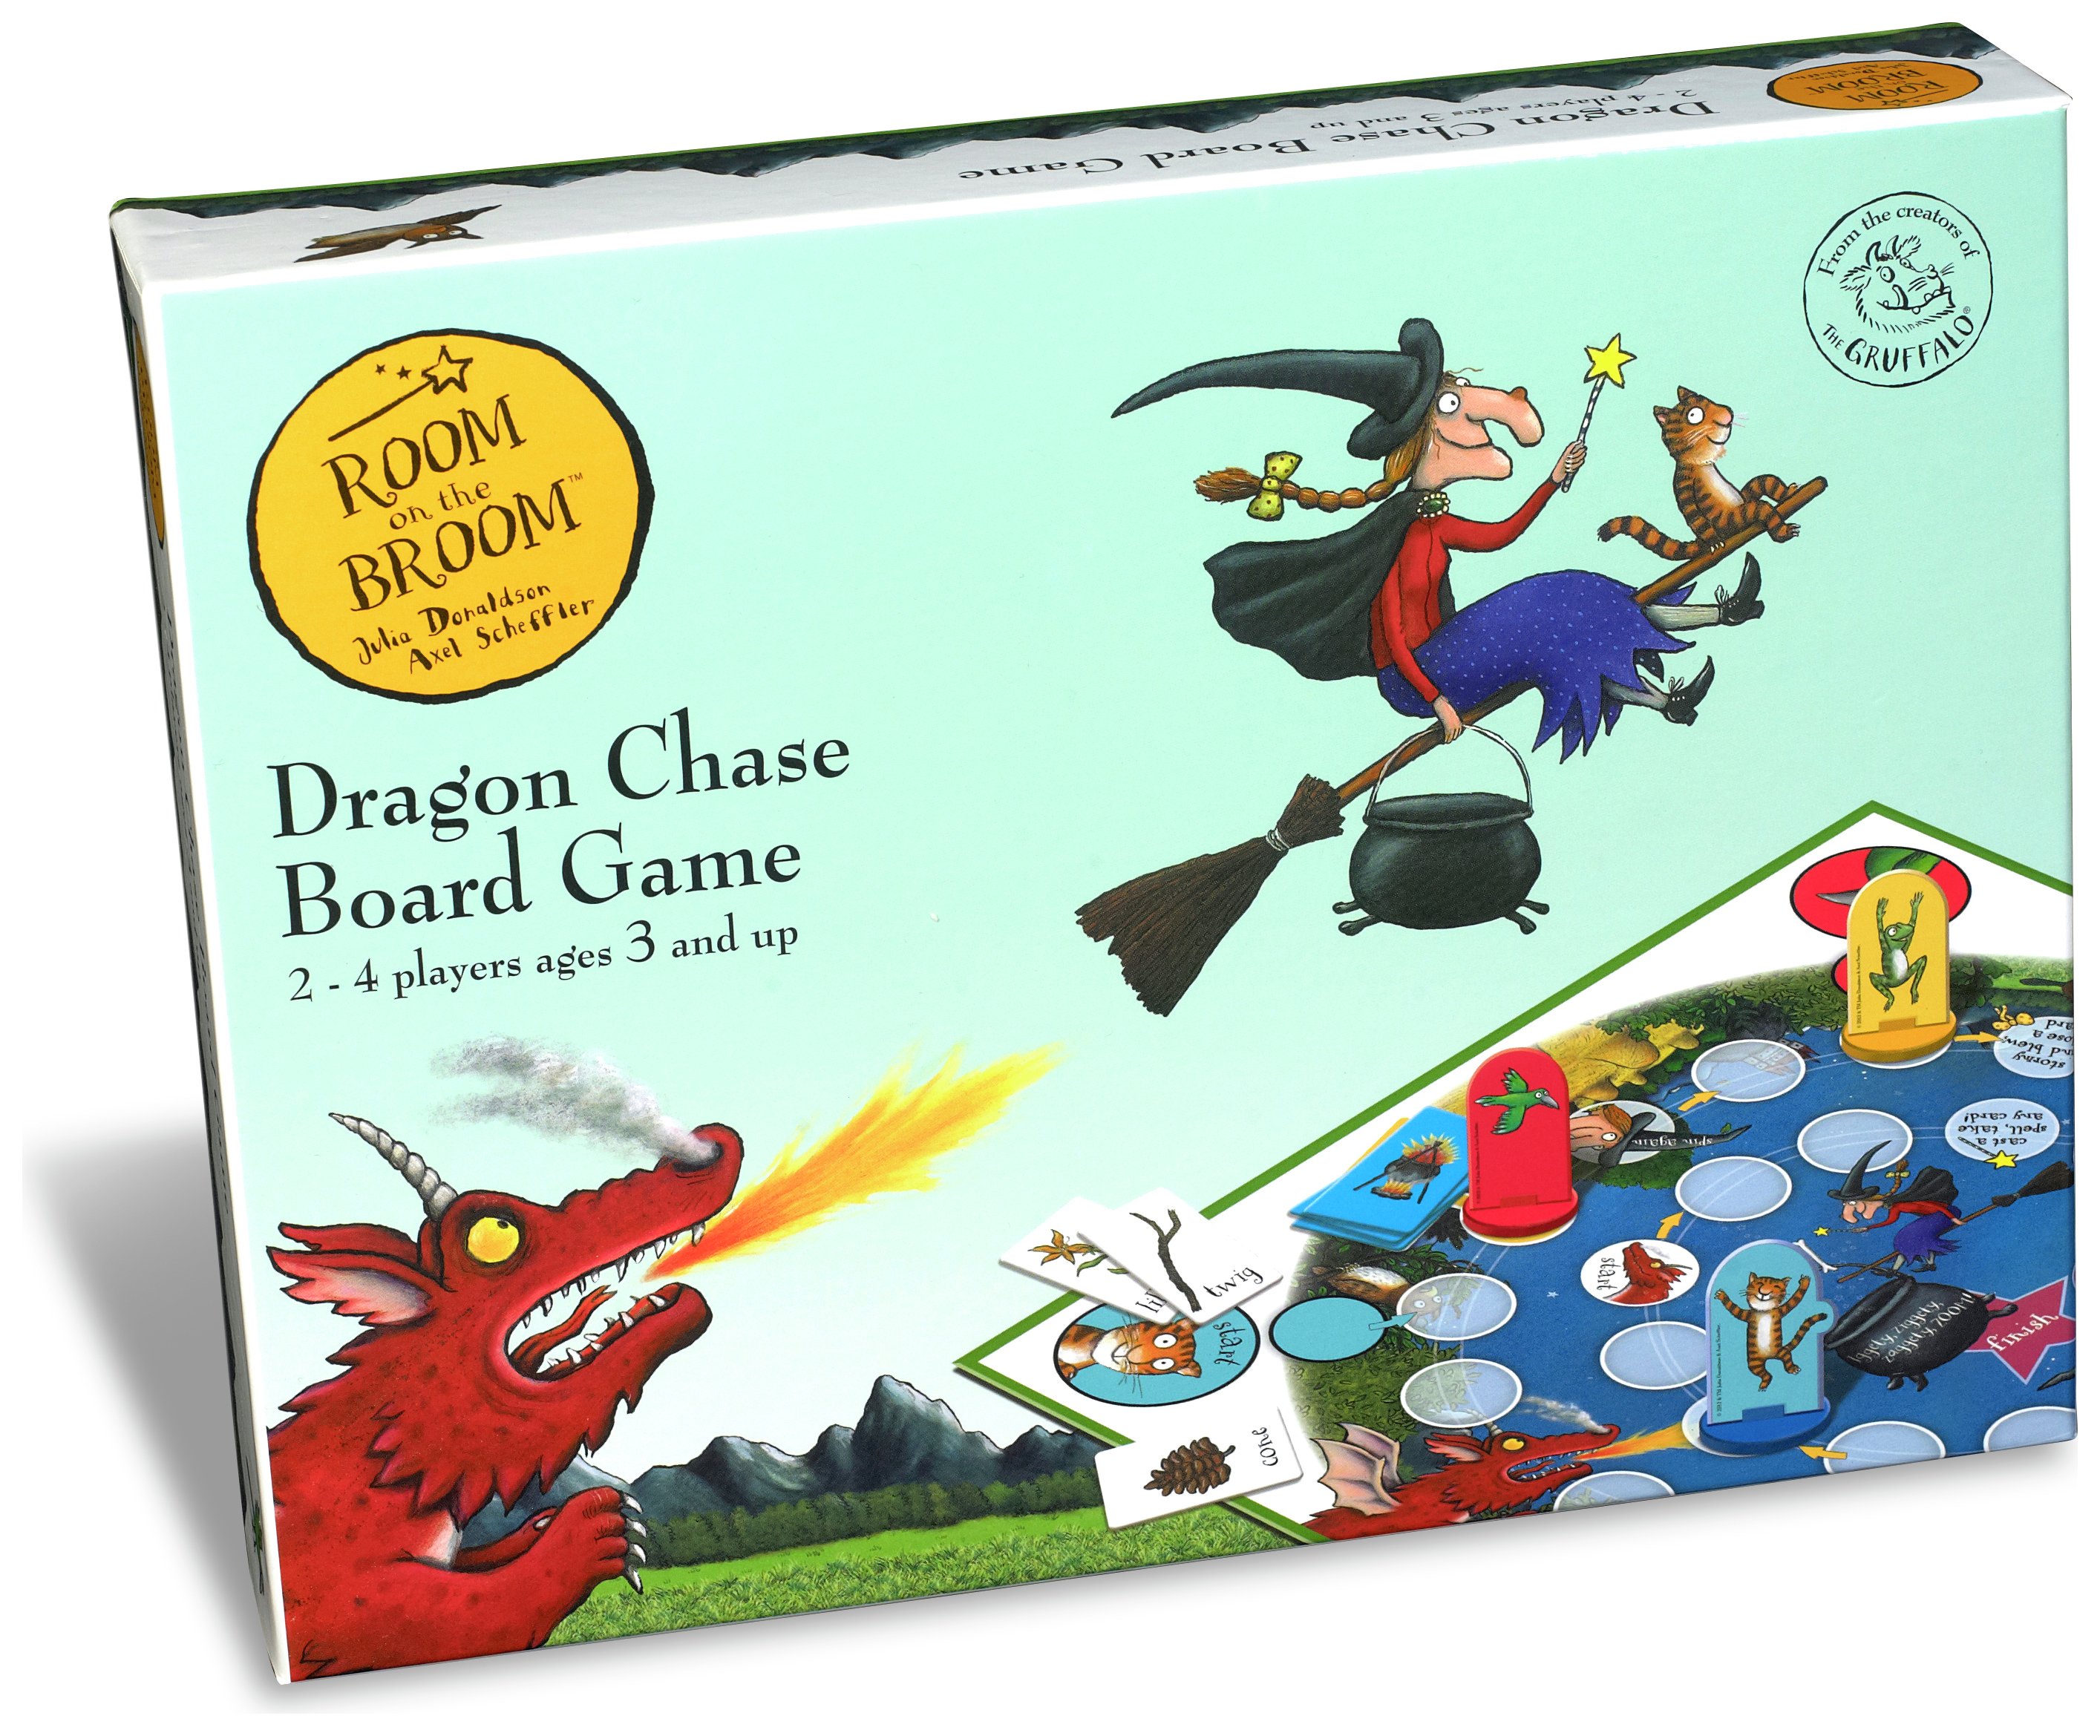 Room on the Broom Board Game. review